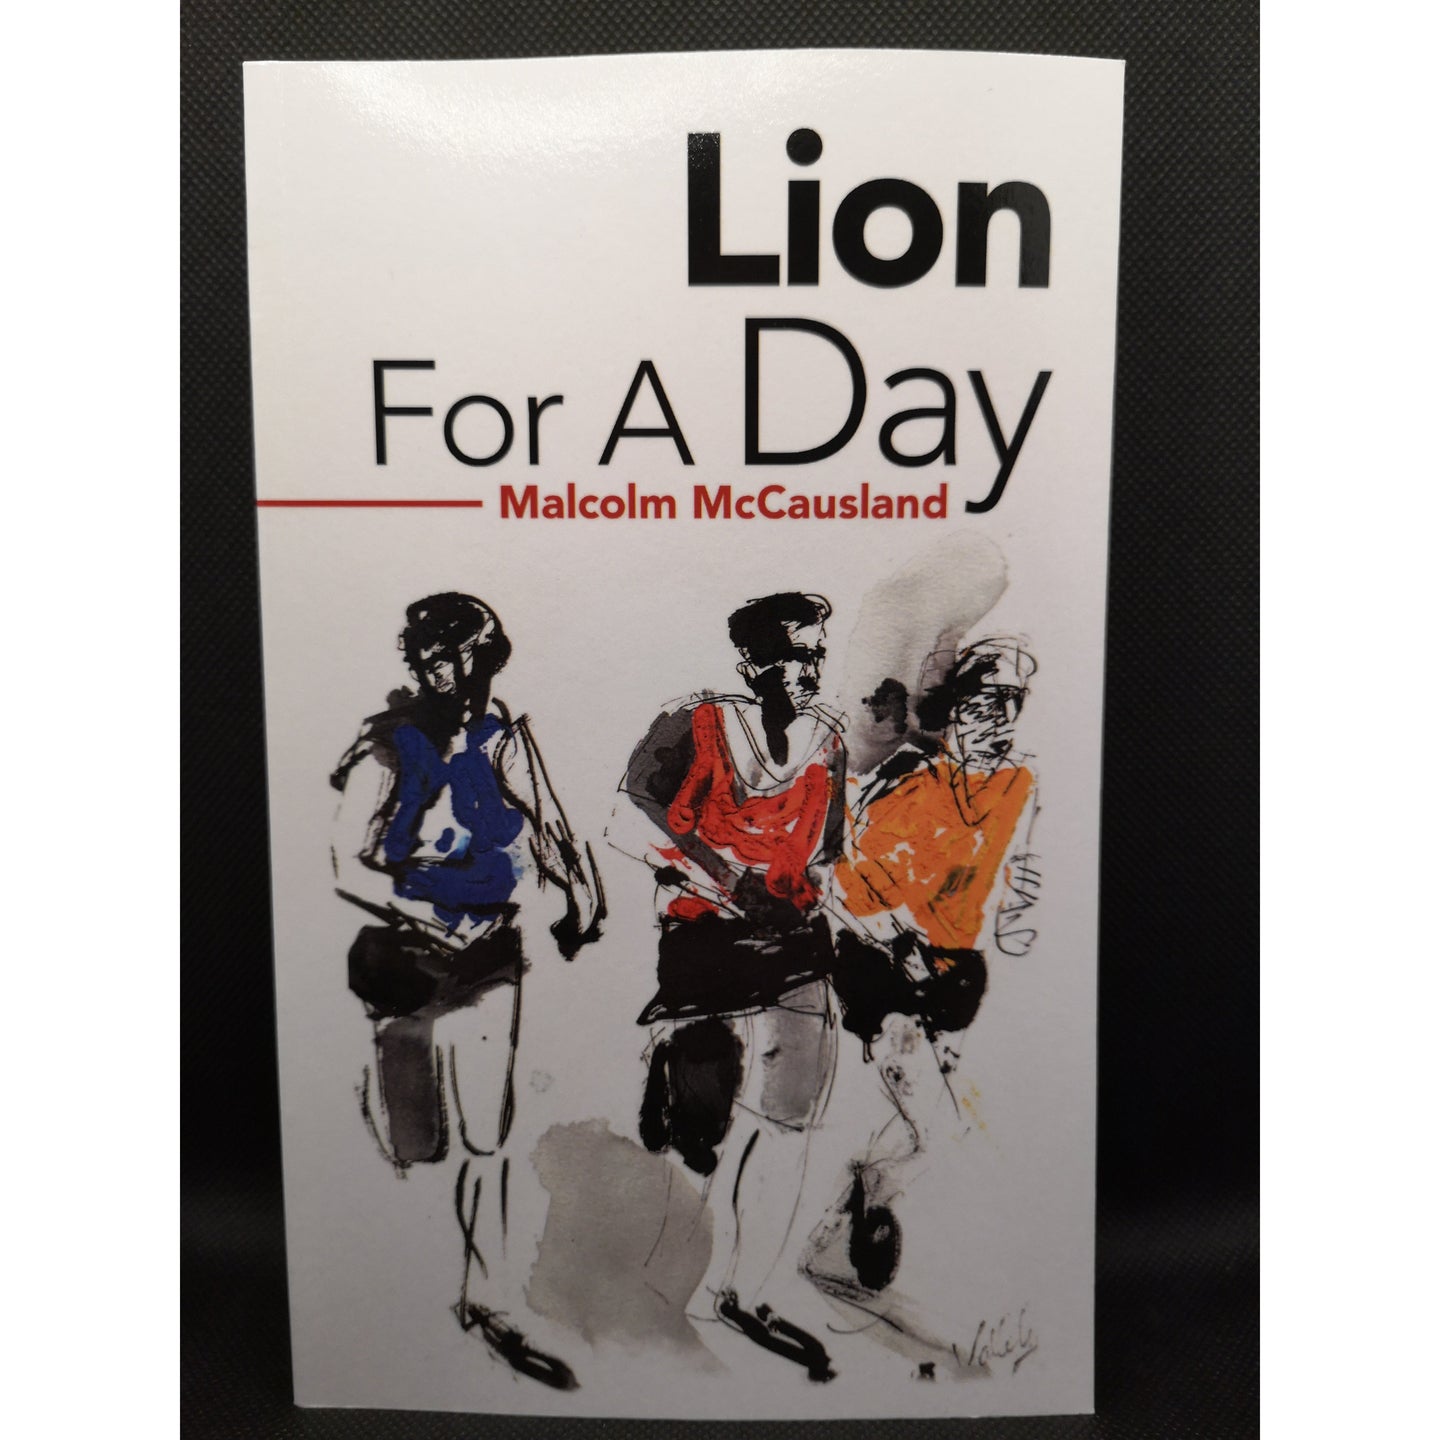 Lion for a Day  by Malcolm McCausland